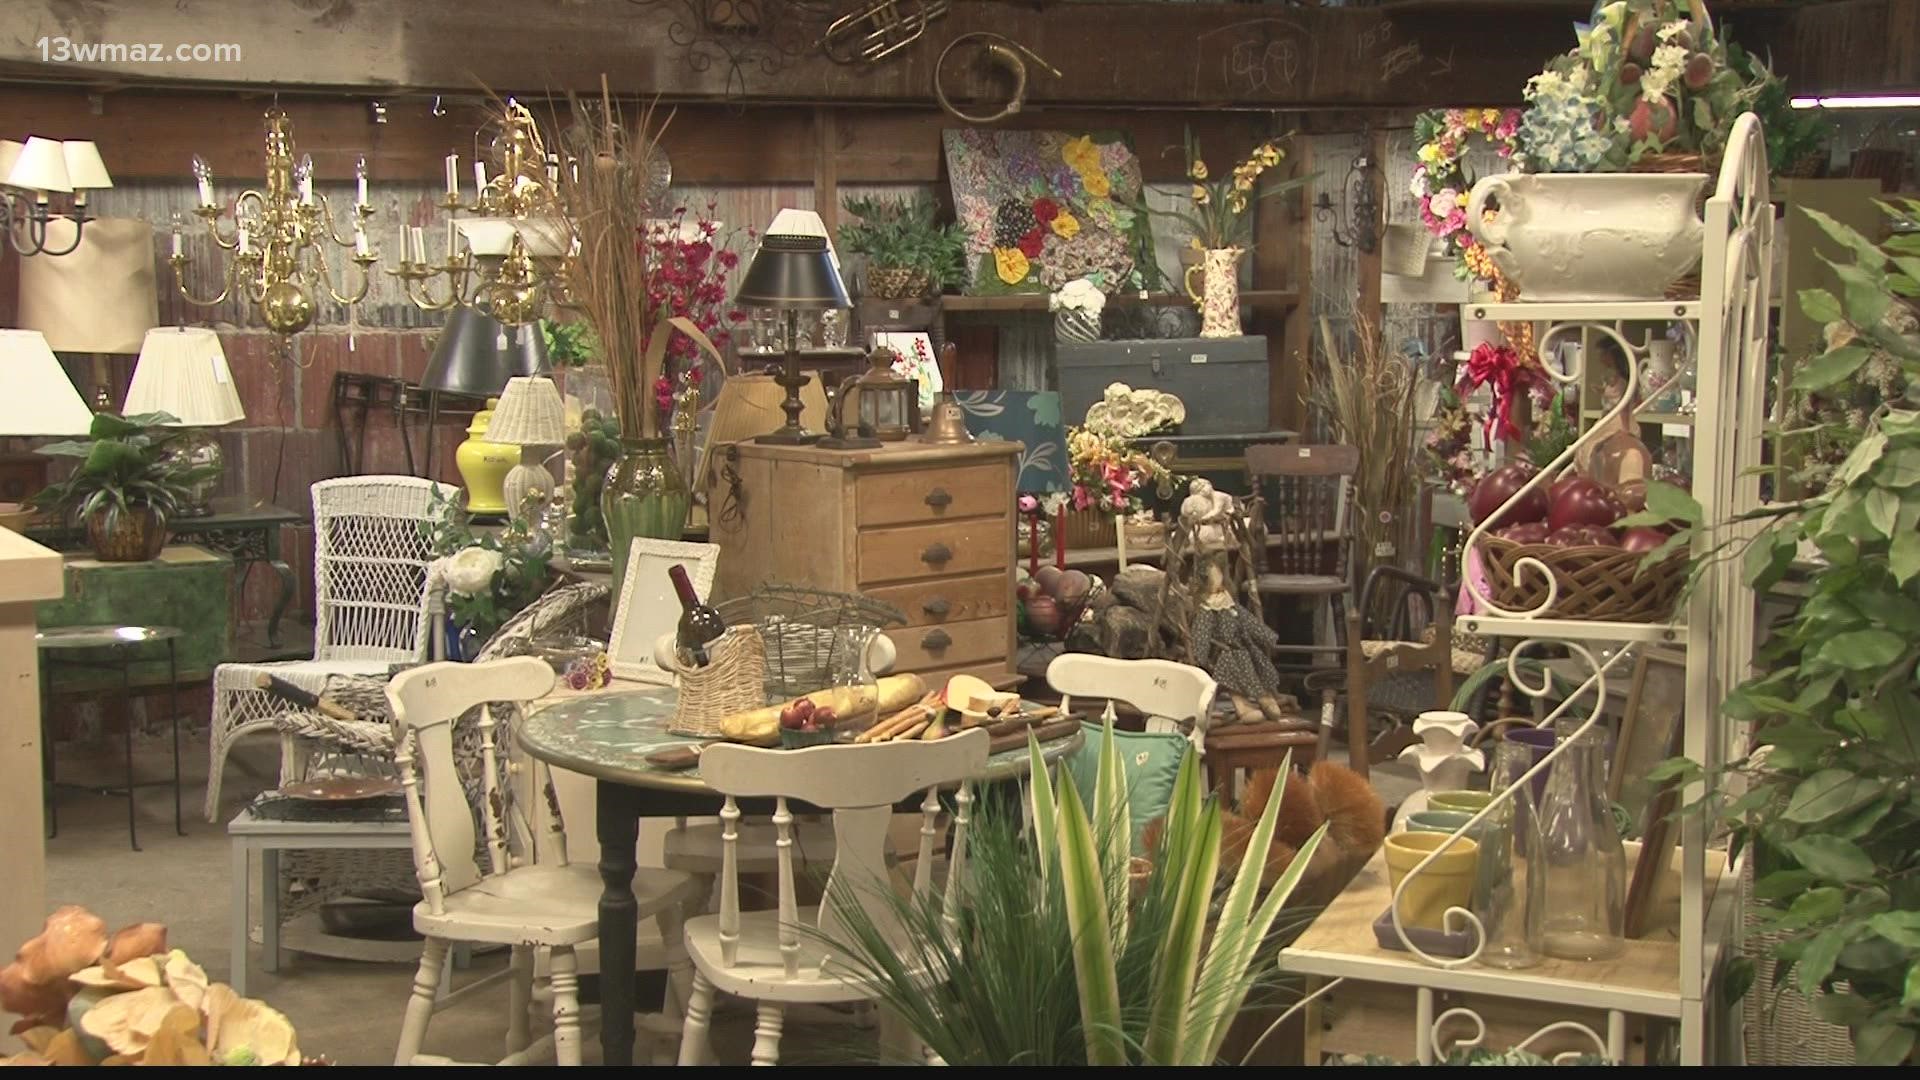 Historic Macon's largest flea market is back, and just in time for spring shopping.